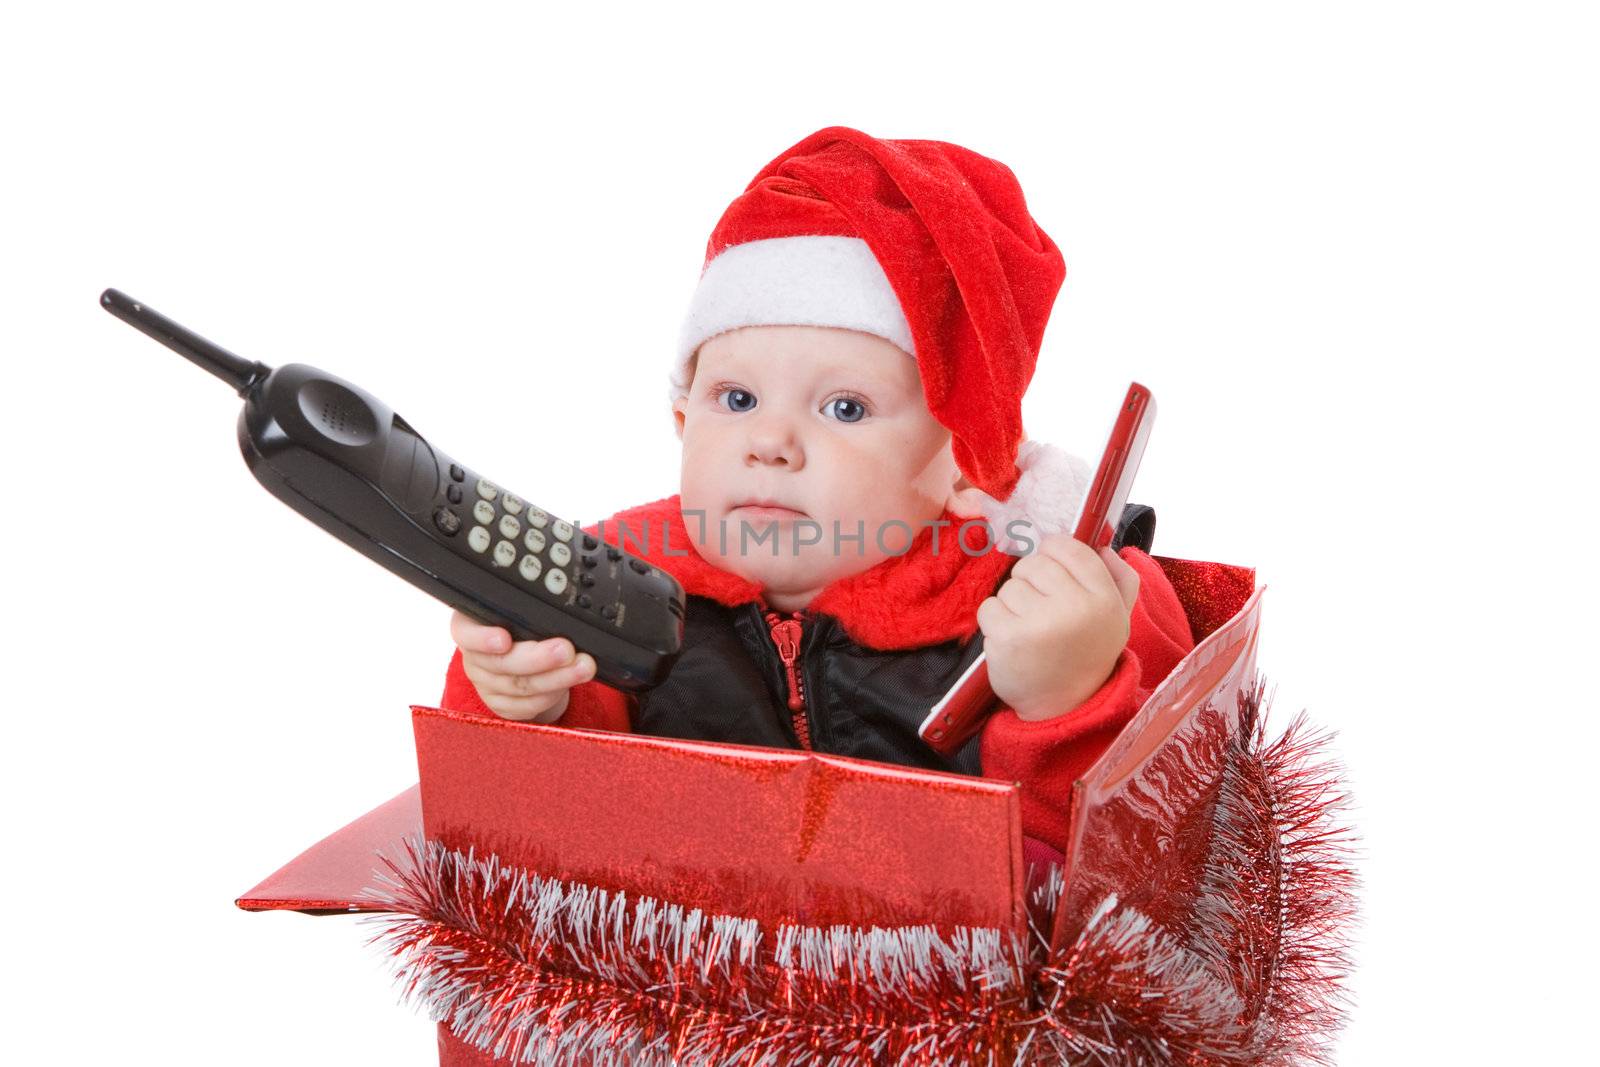 infant calling by phone in the christmas box by vsurkov